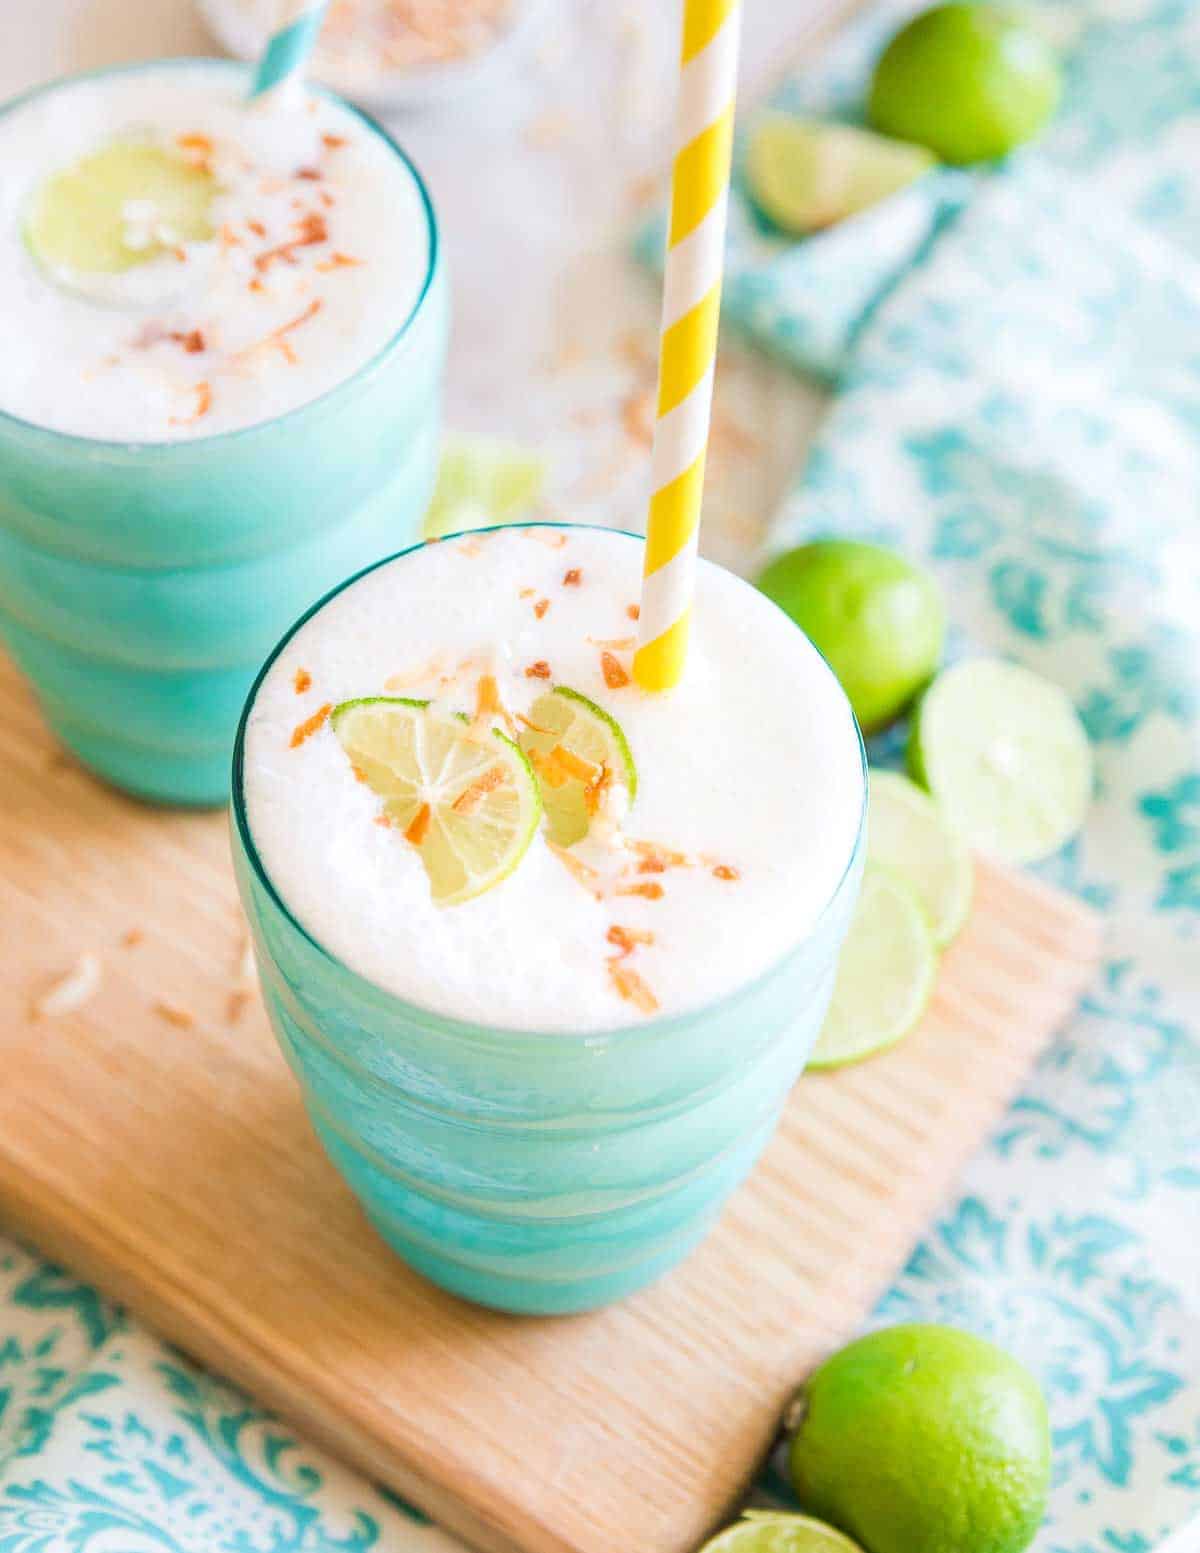 This key lime smoothie made with light coconut milk tastes just like key lime pie and the tropics. It's the perfect drink for summer!